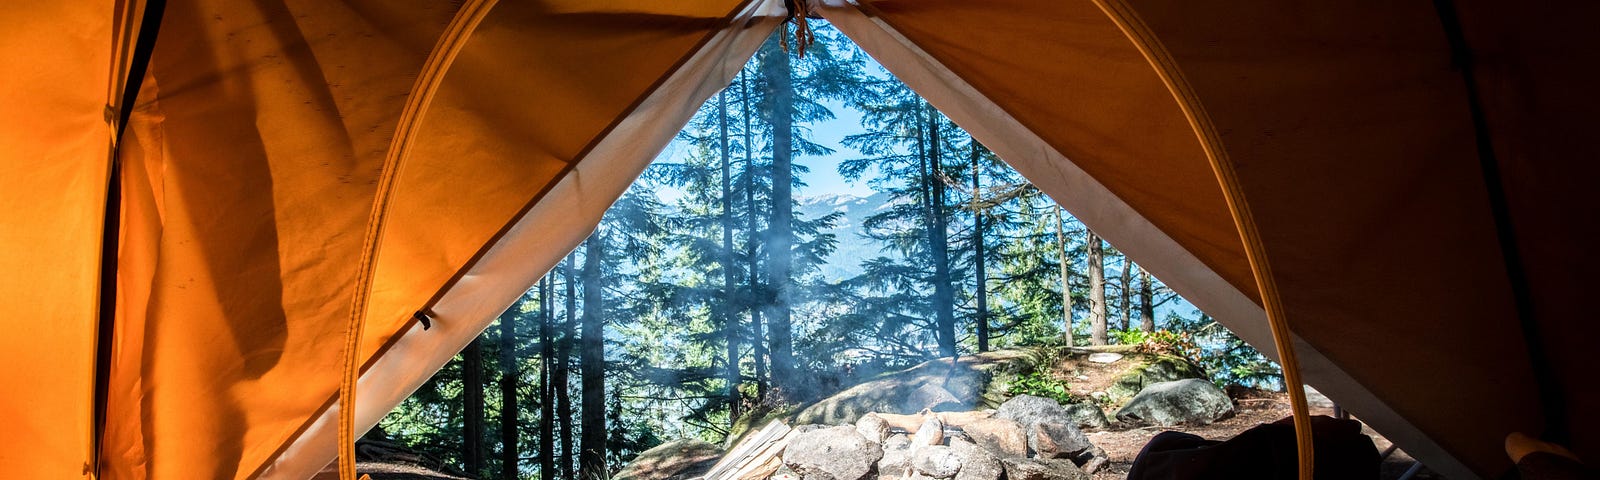 View of forest from inside tent, the tent’s opening has triangular and circular layers which resemble the GraphQL logo